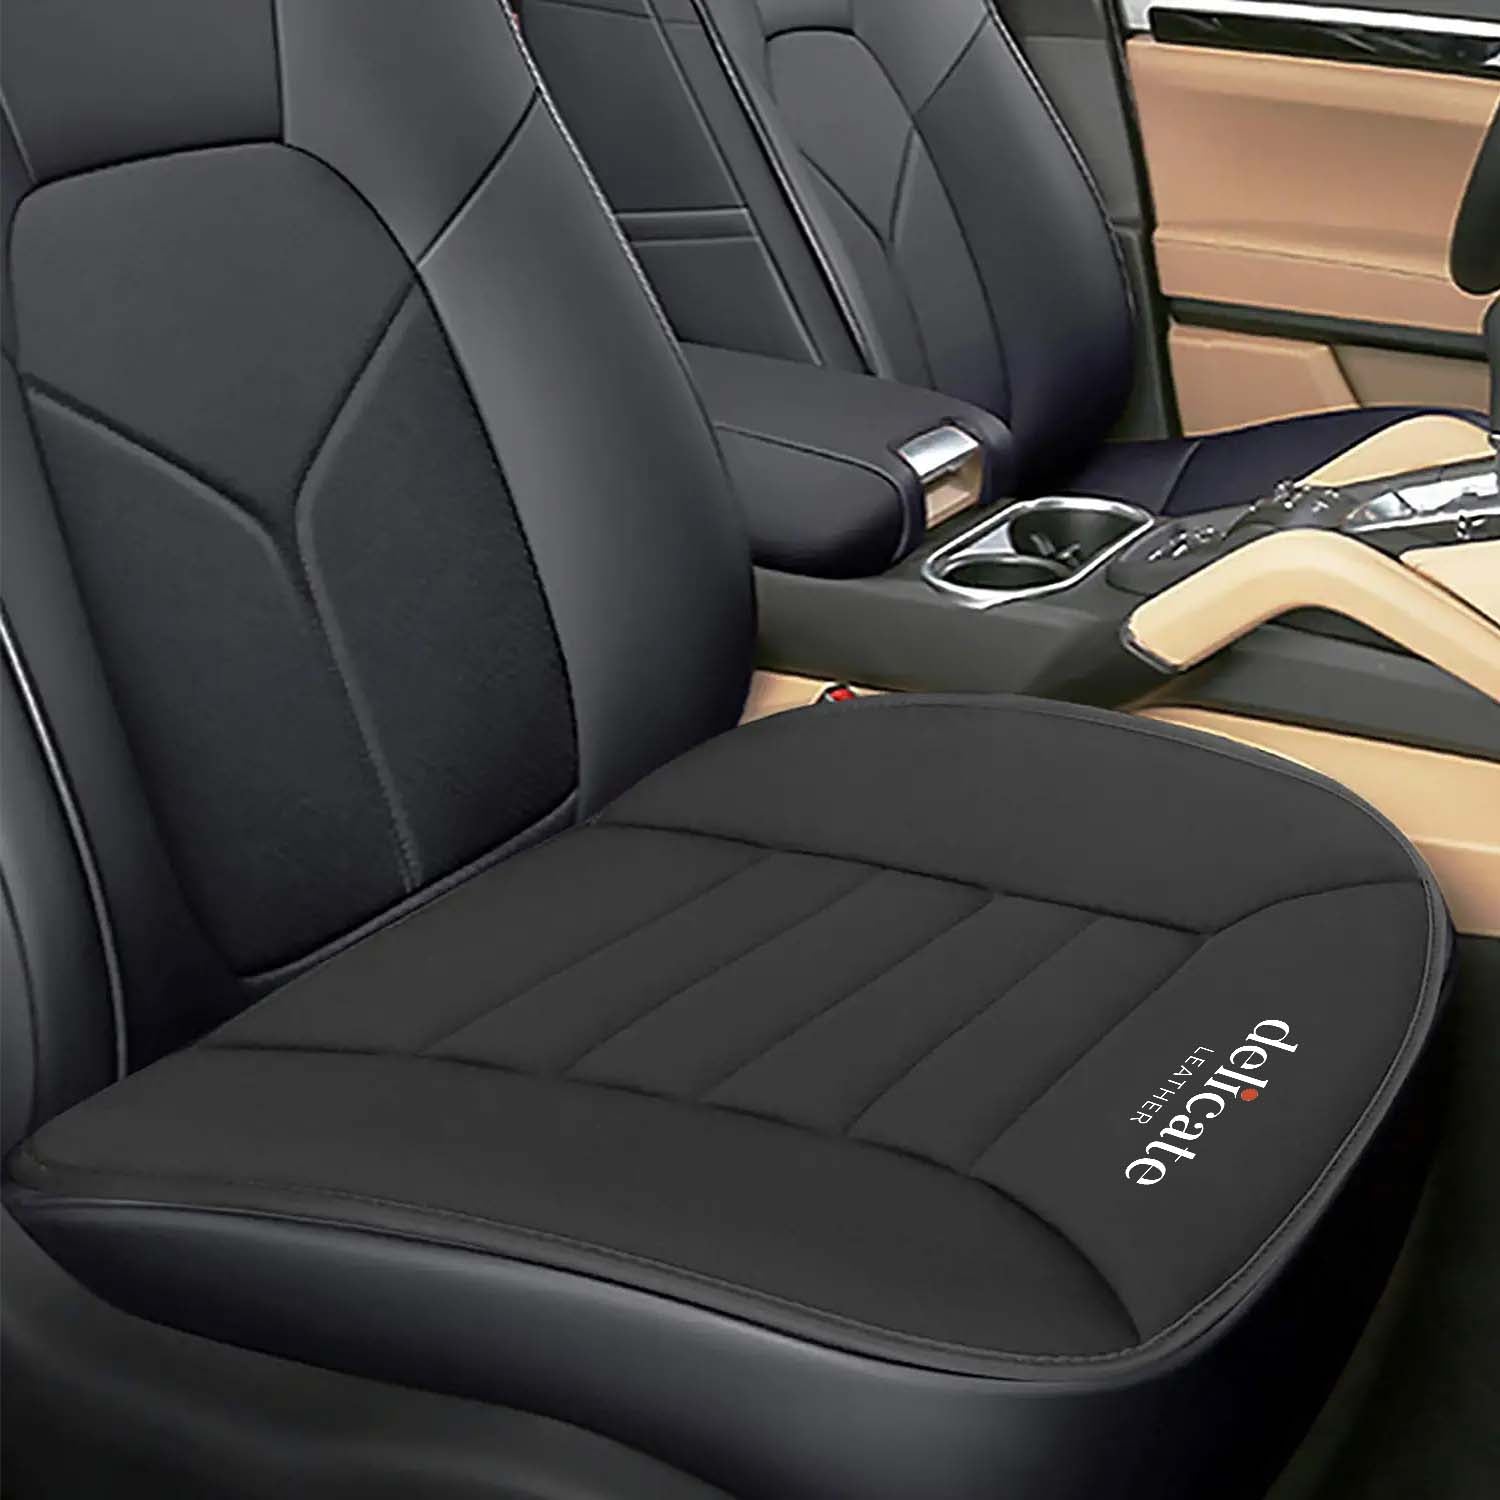 Maserati Car Seat Cushion: Enhance Comfort and Support for Your Drive